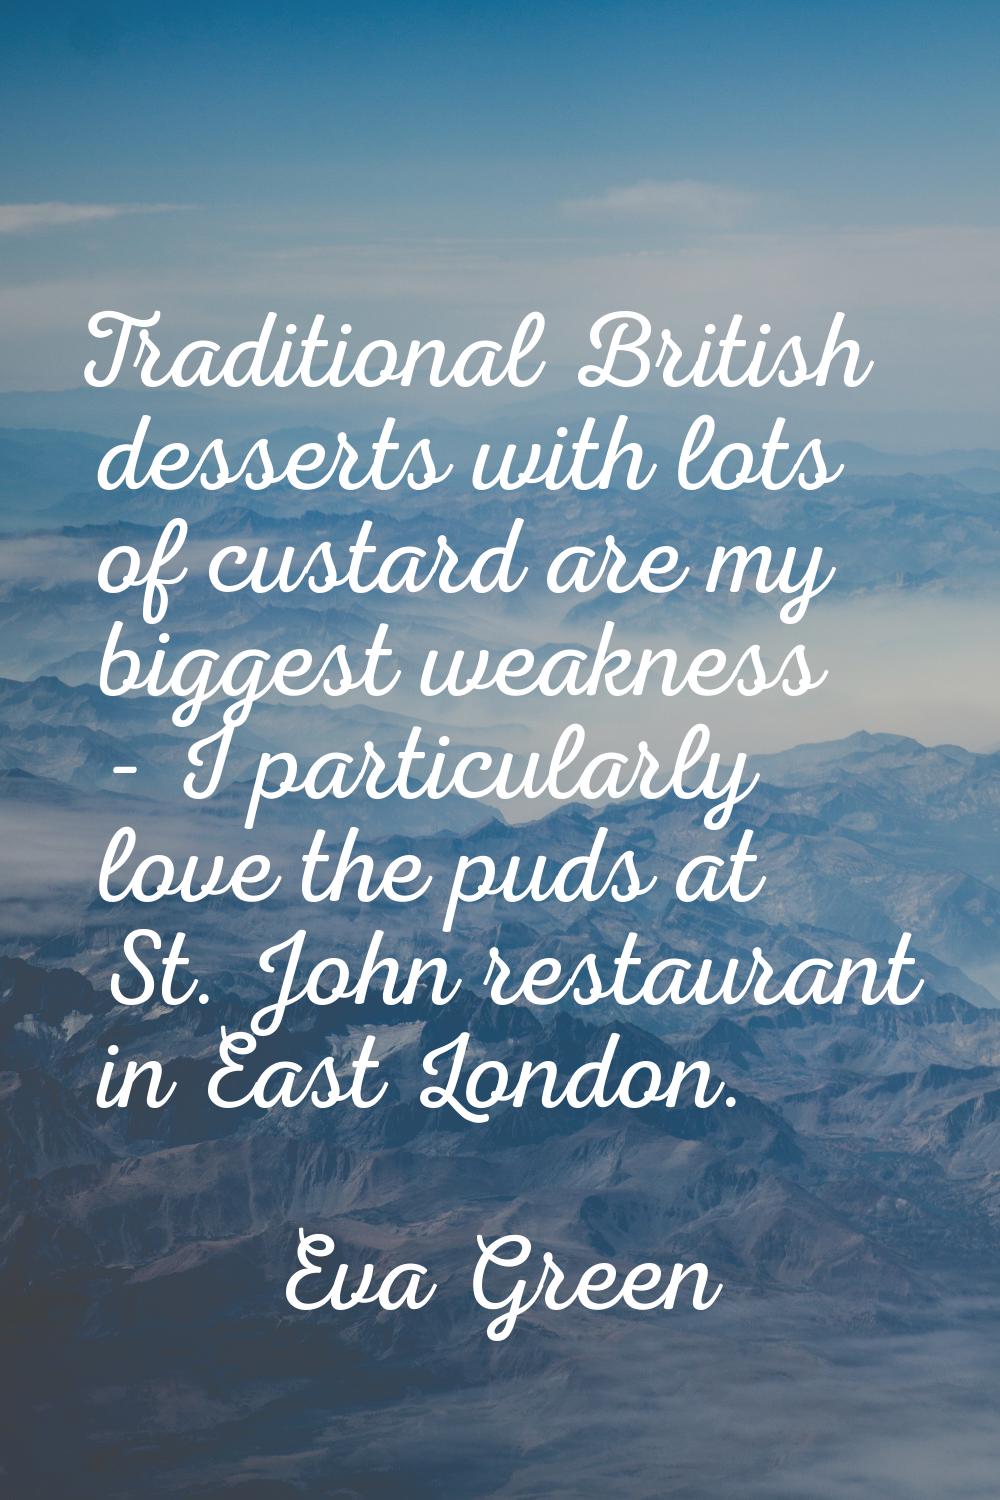 Traditional British desserts with lots of custard are my biggest weakness - I particularly love the